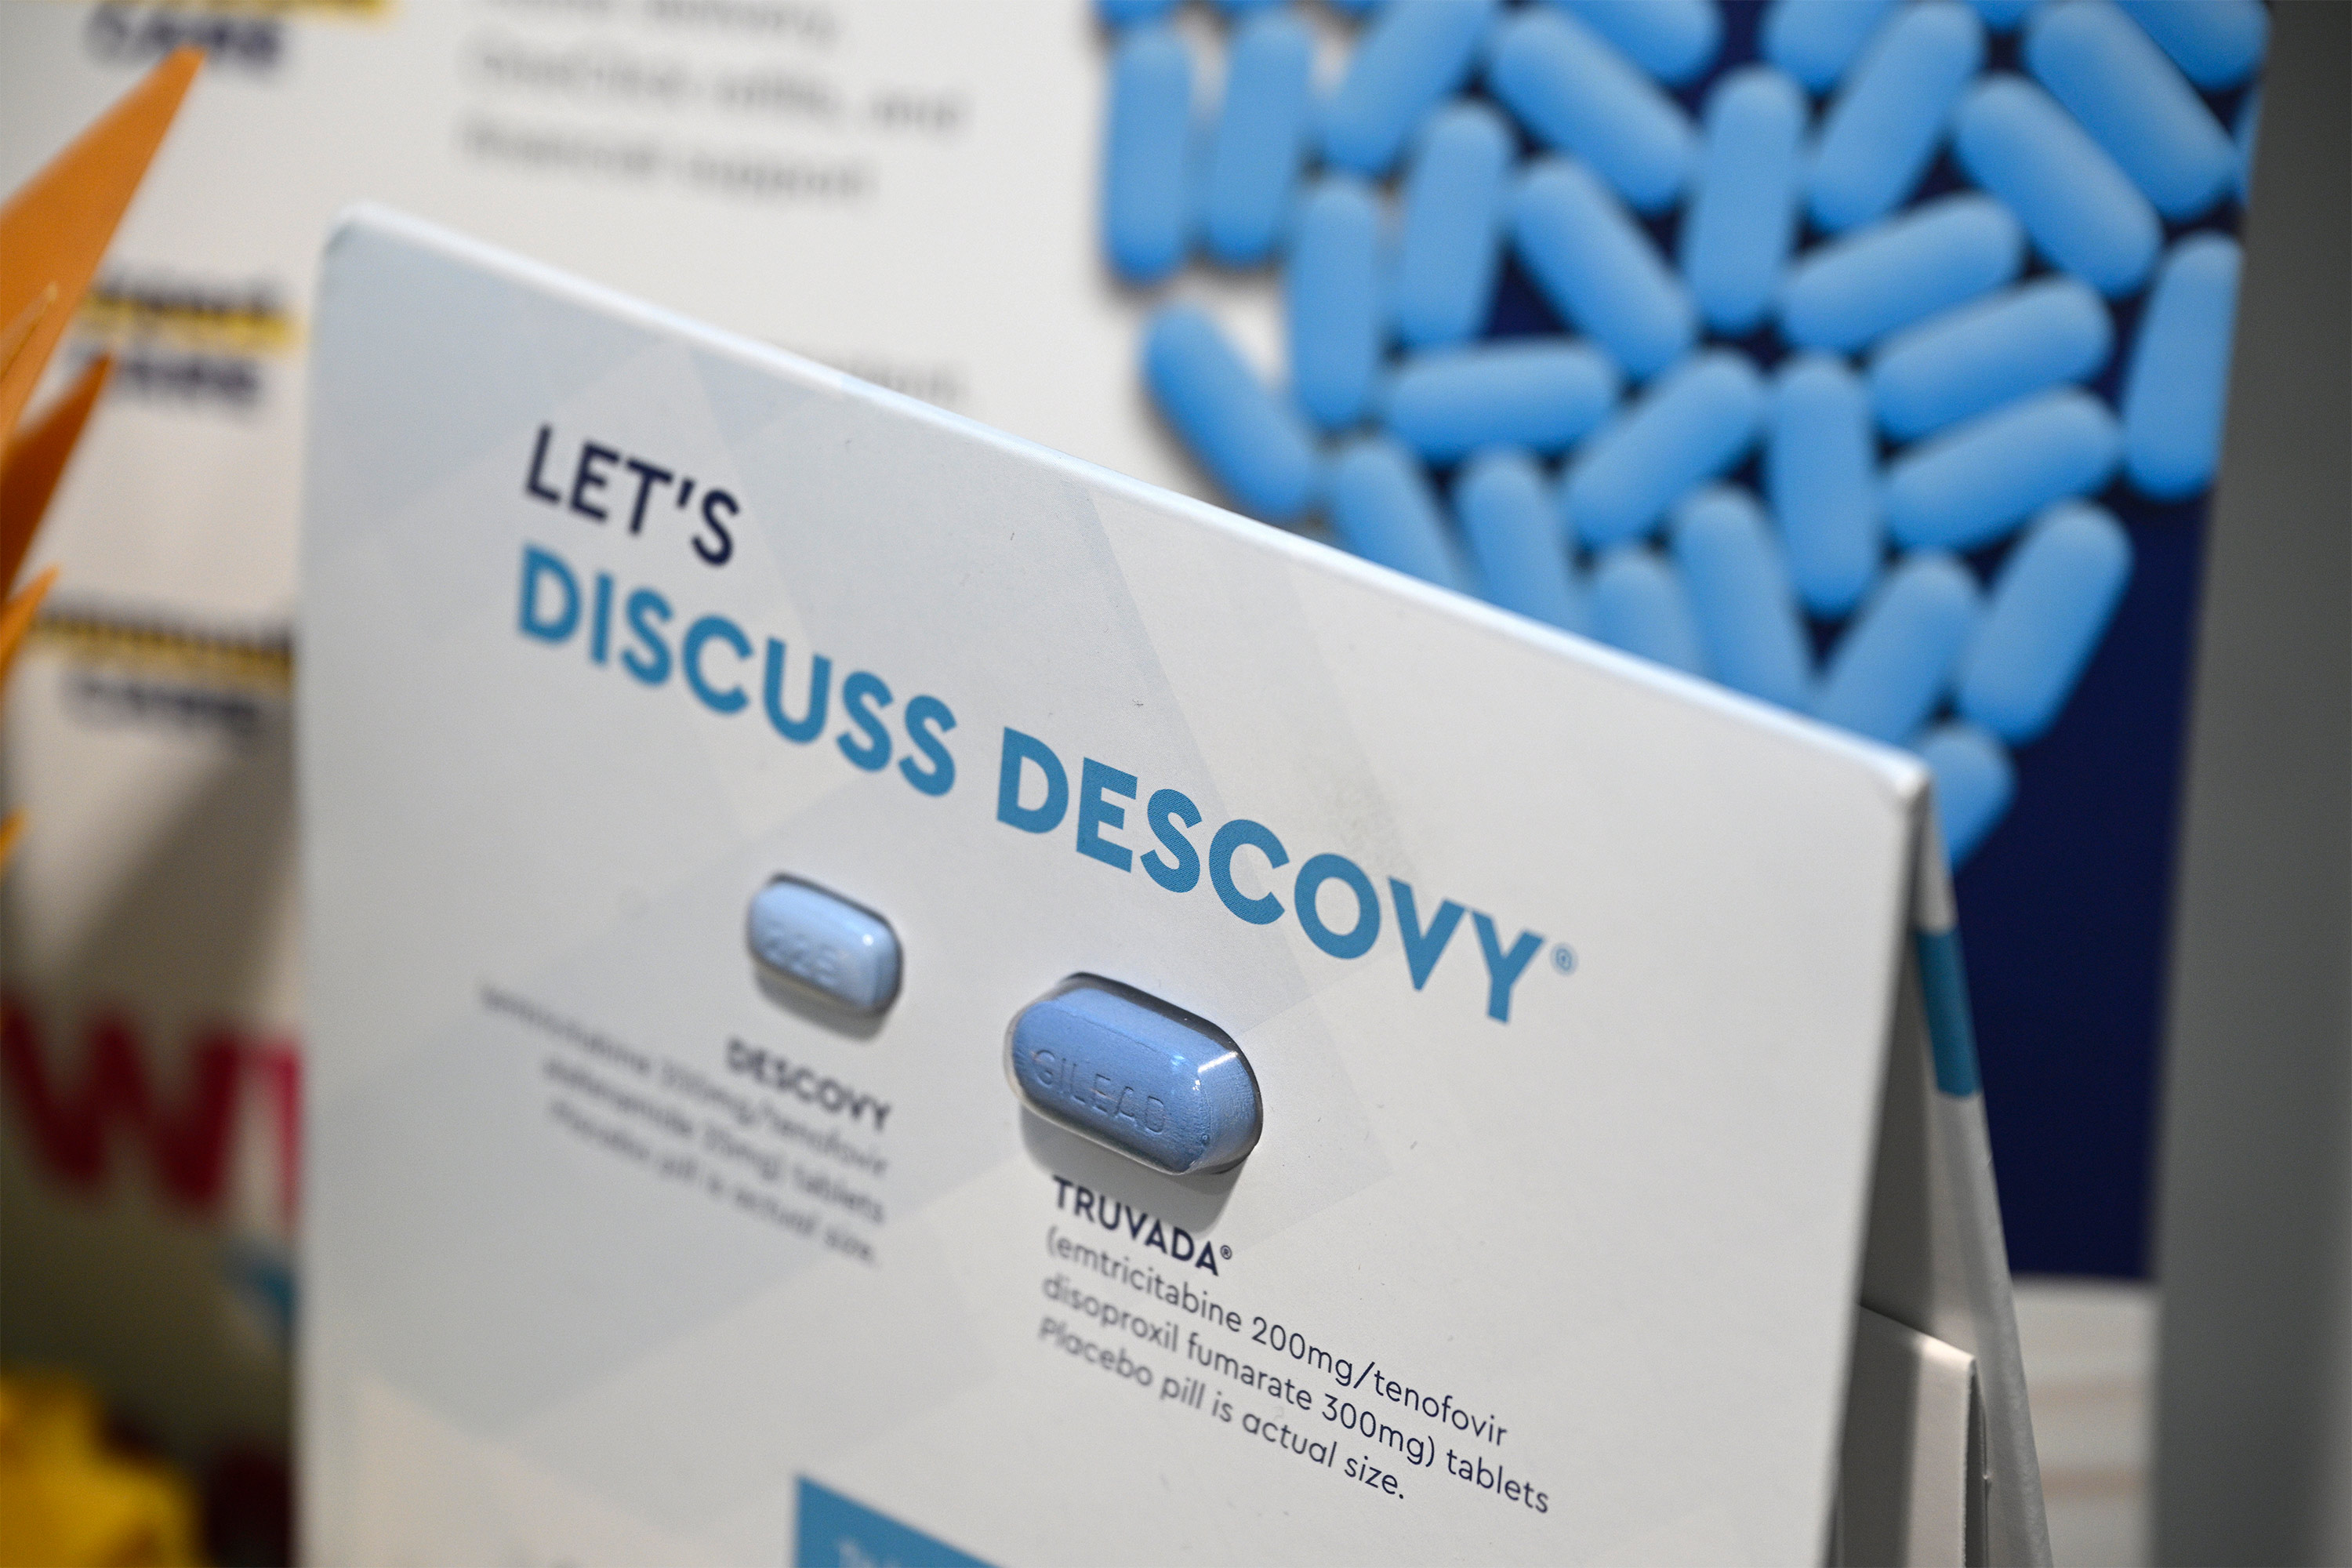 A small sign resting on a table shows information about Descovy and Truvada.